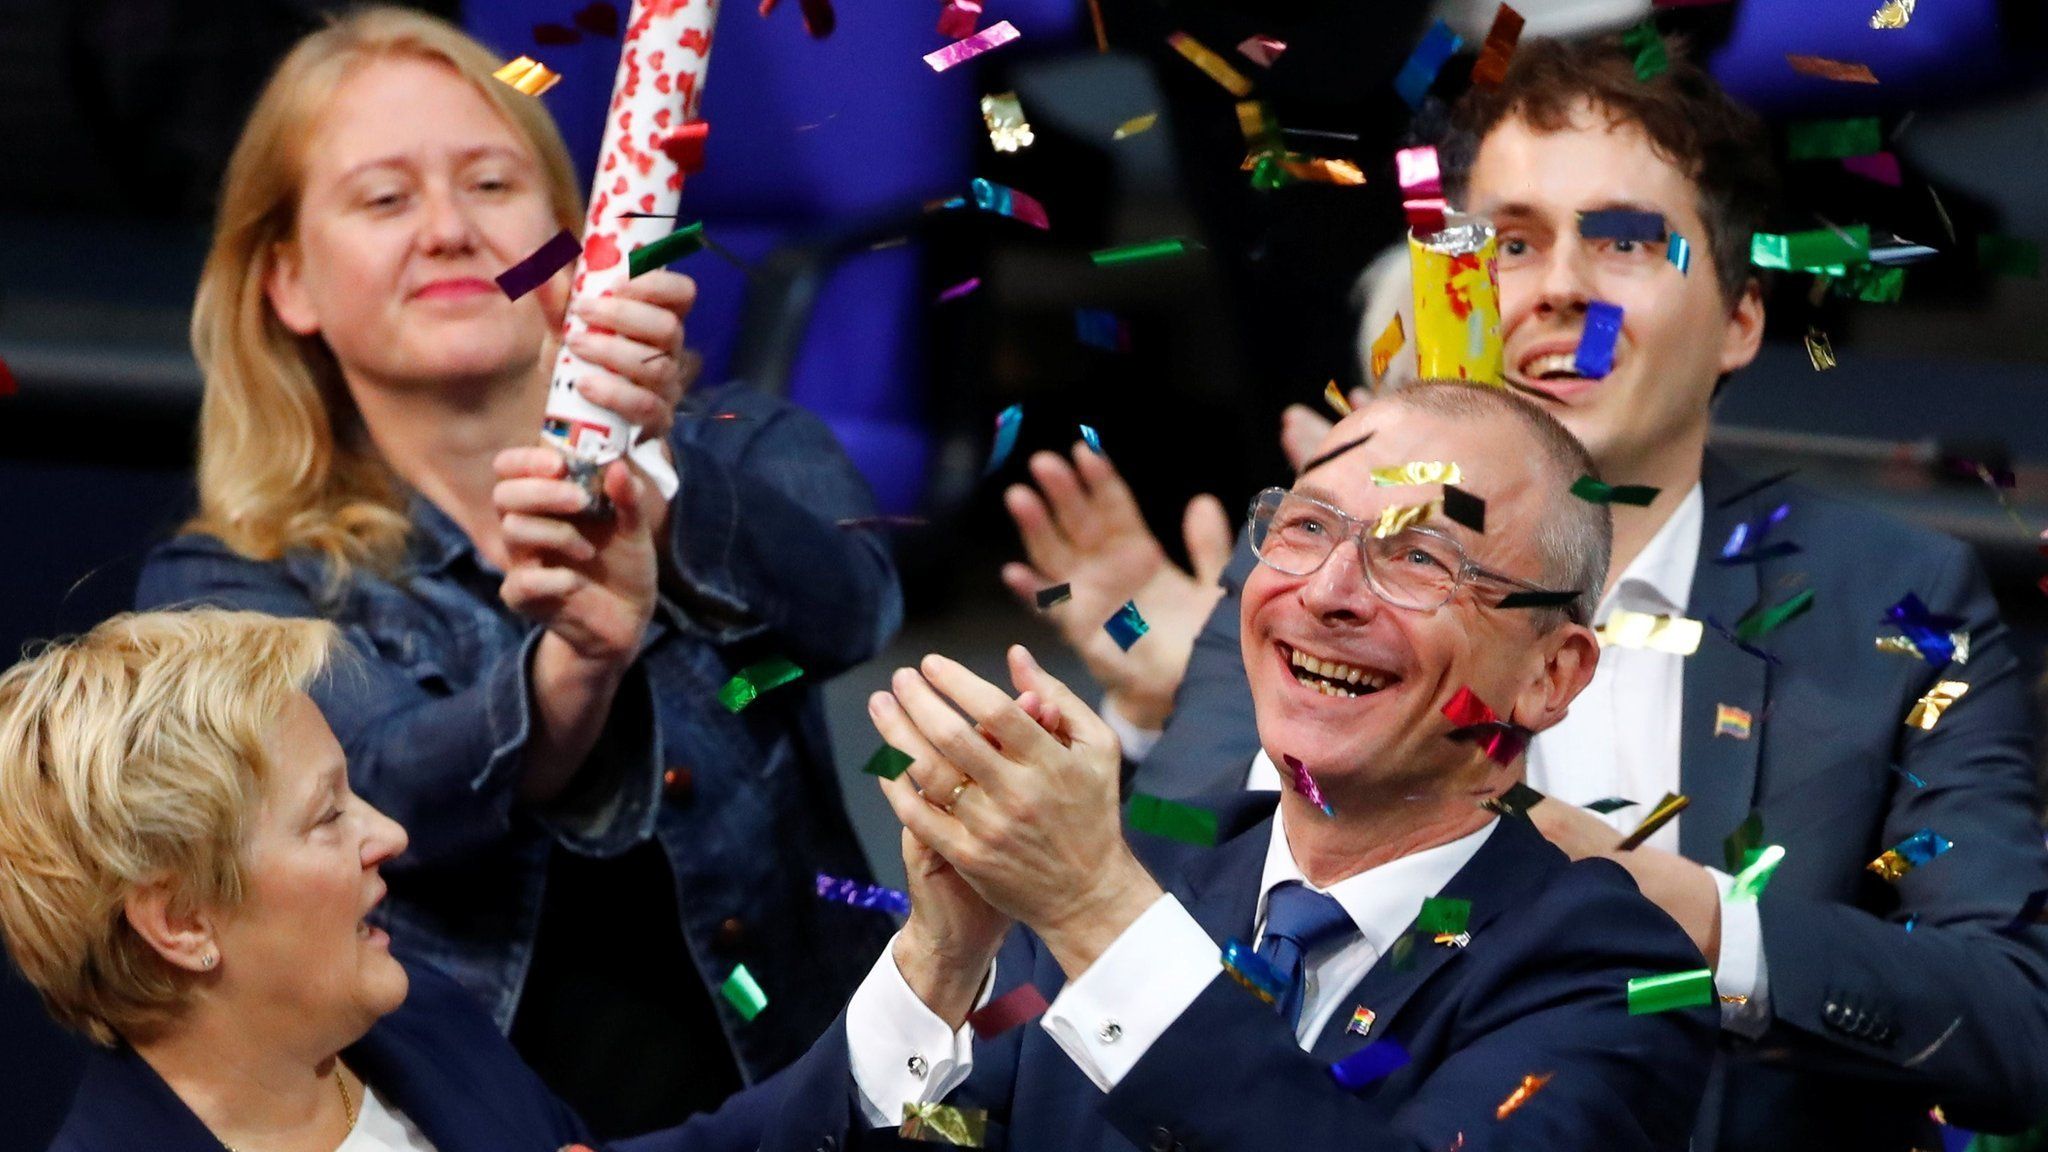 Volker Beck of Germany's environmental party Die Gruenen (The Greens) celebrates after the lower house of parliament, the Bundestag, voted on legalising same-sex marriage, in Berlin, Germany on 30 June 2017